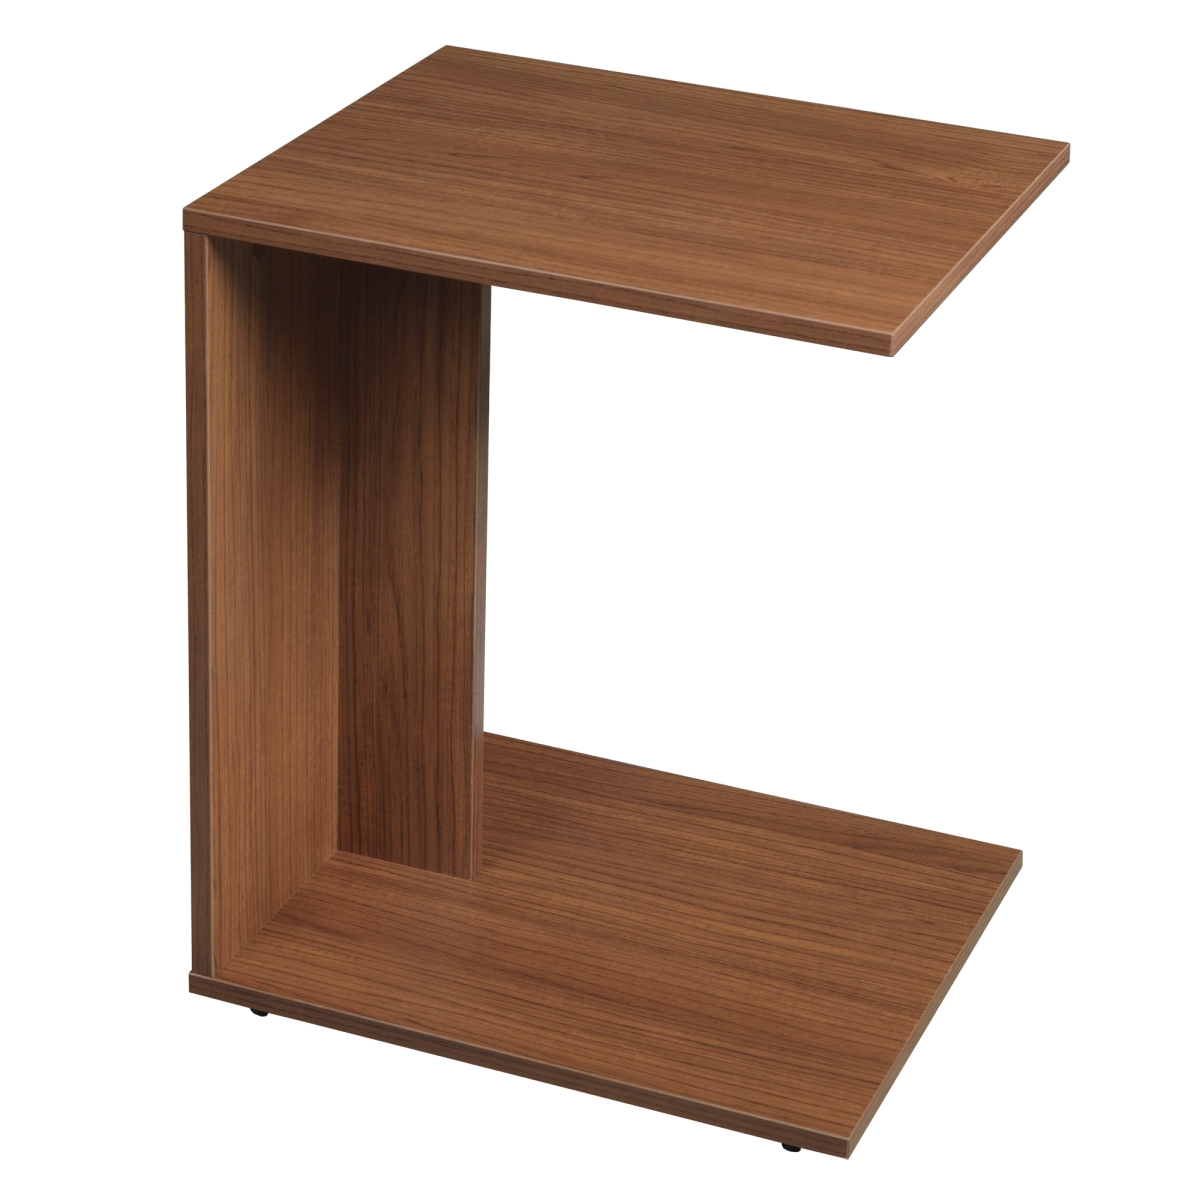 Nlcst1418wn Lux C-shaped Side Table, Walnut